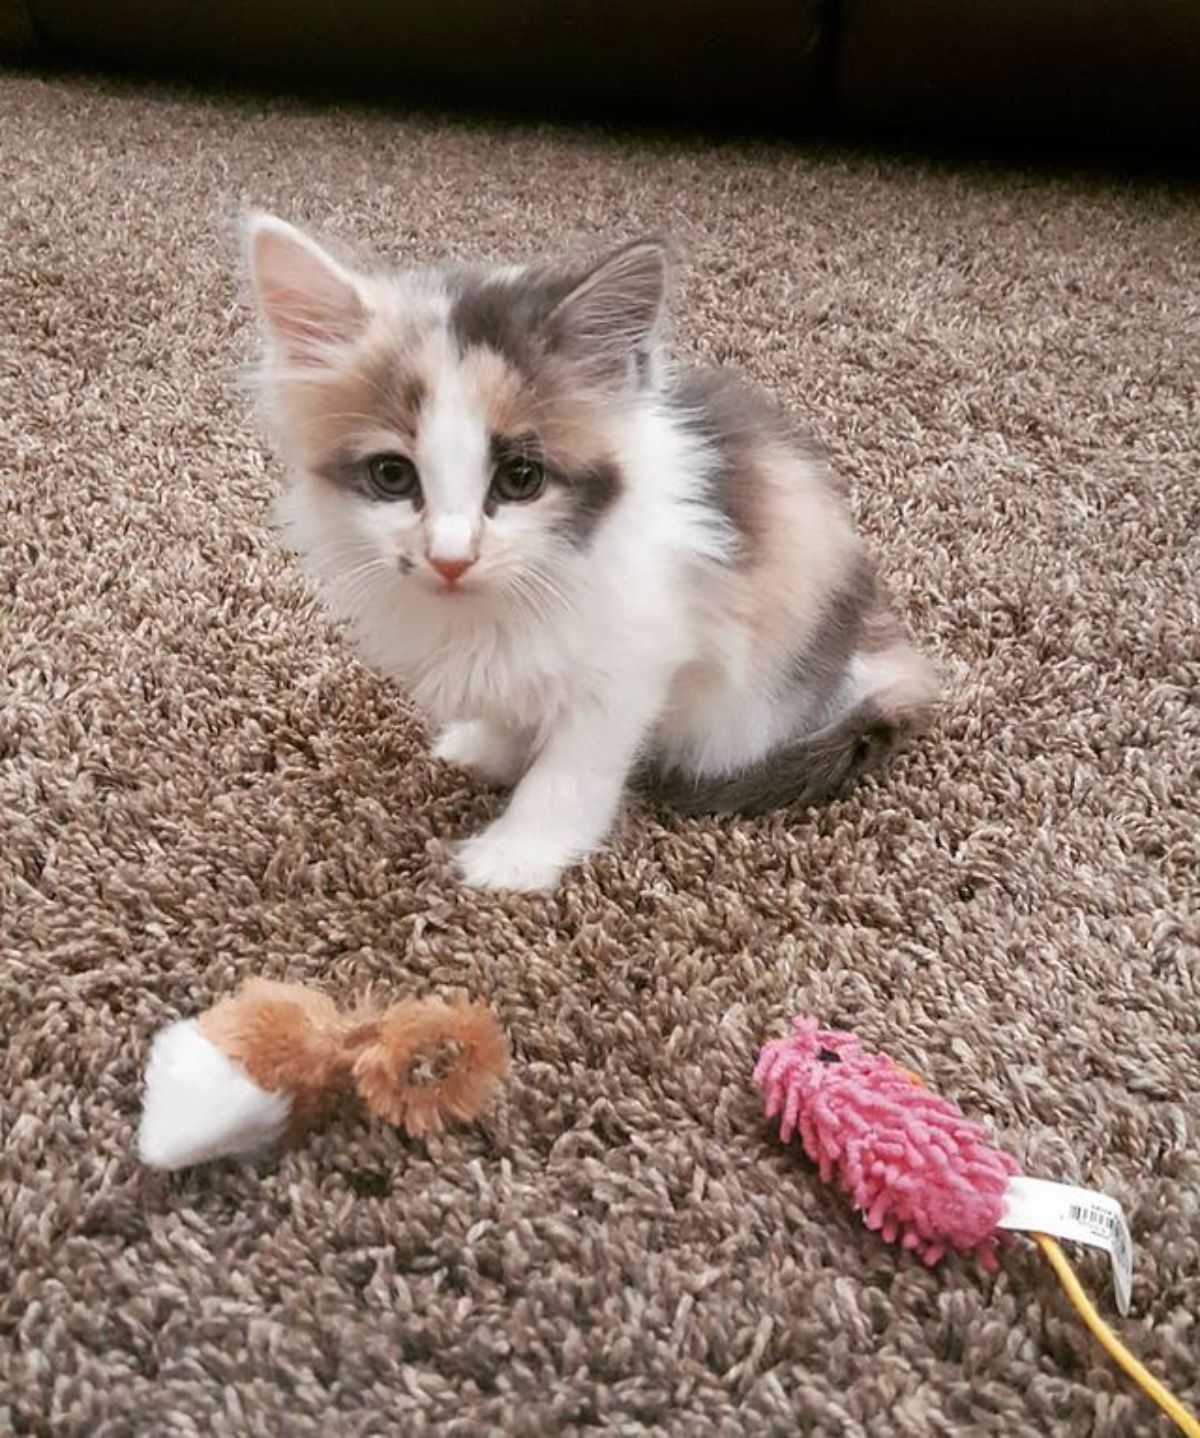 A fluffy calico maine coon kitten sitting on a carpet near cat toys.